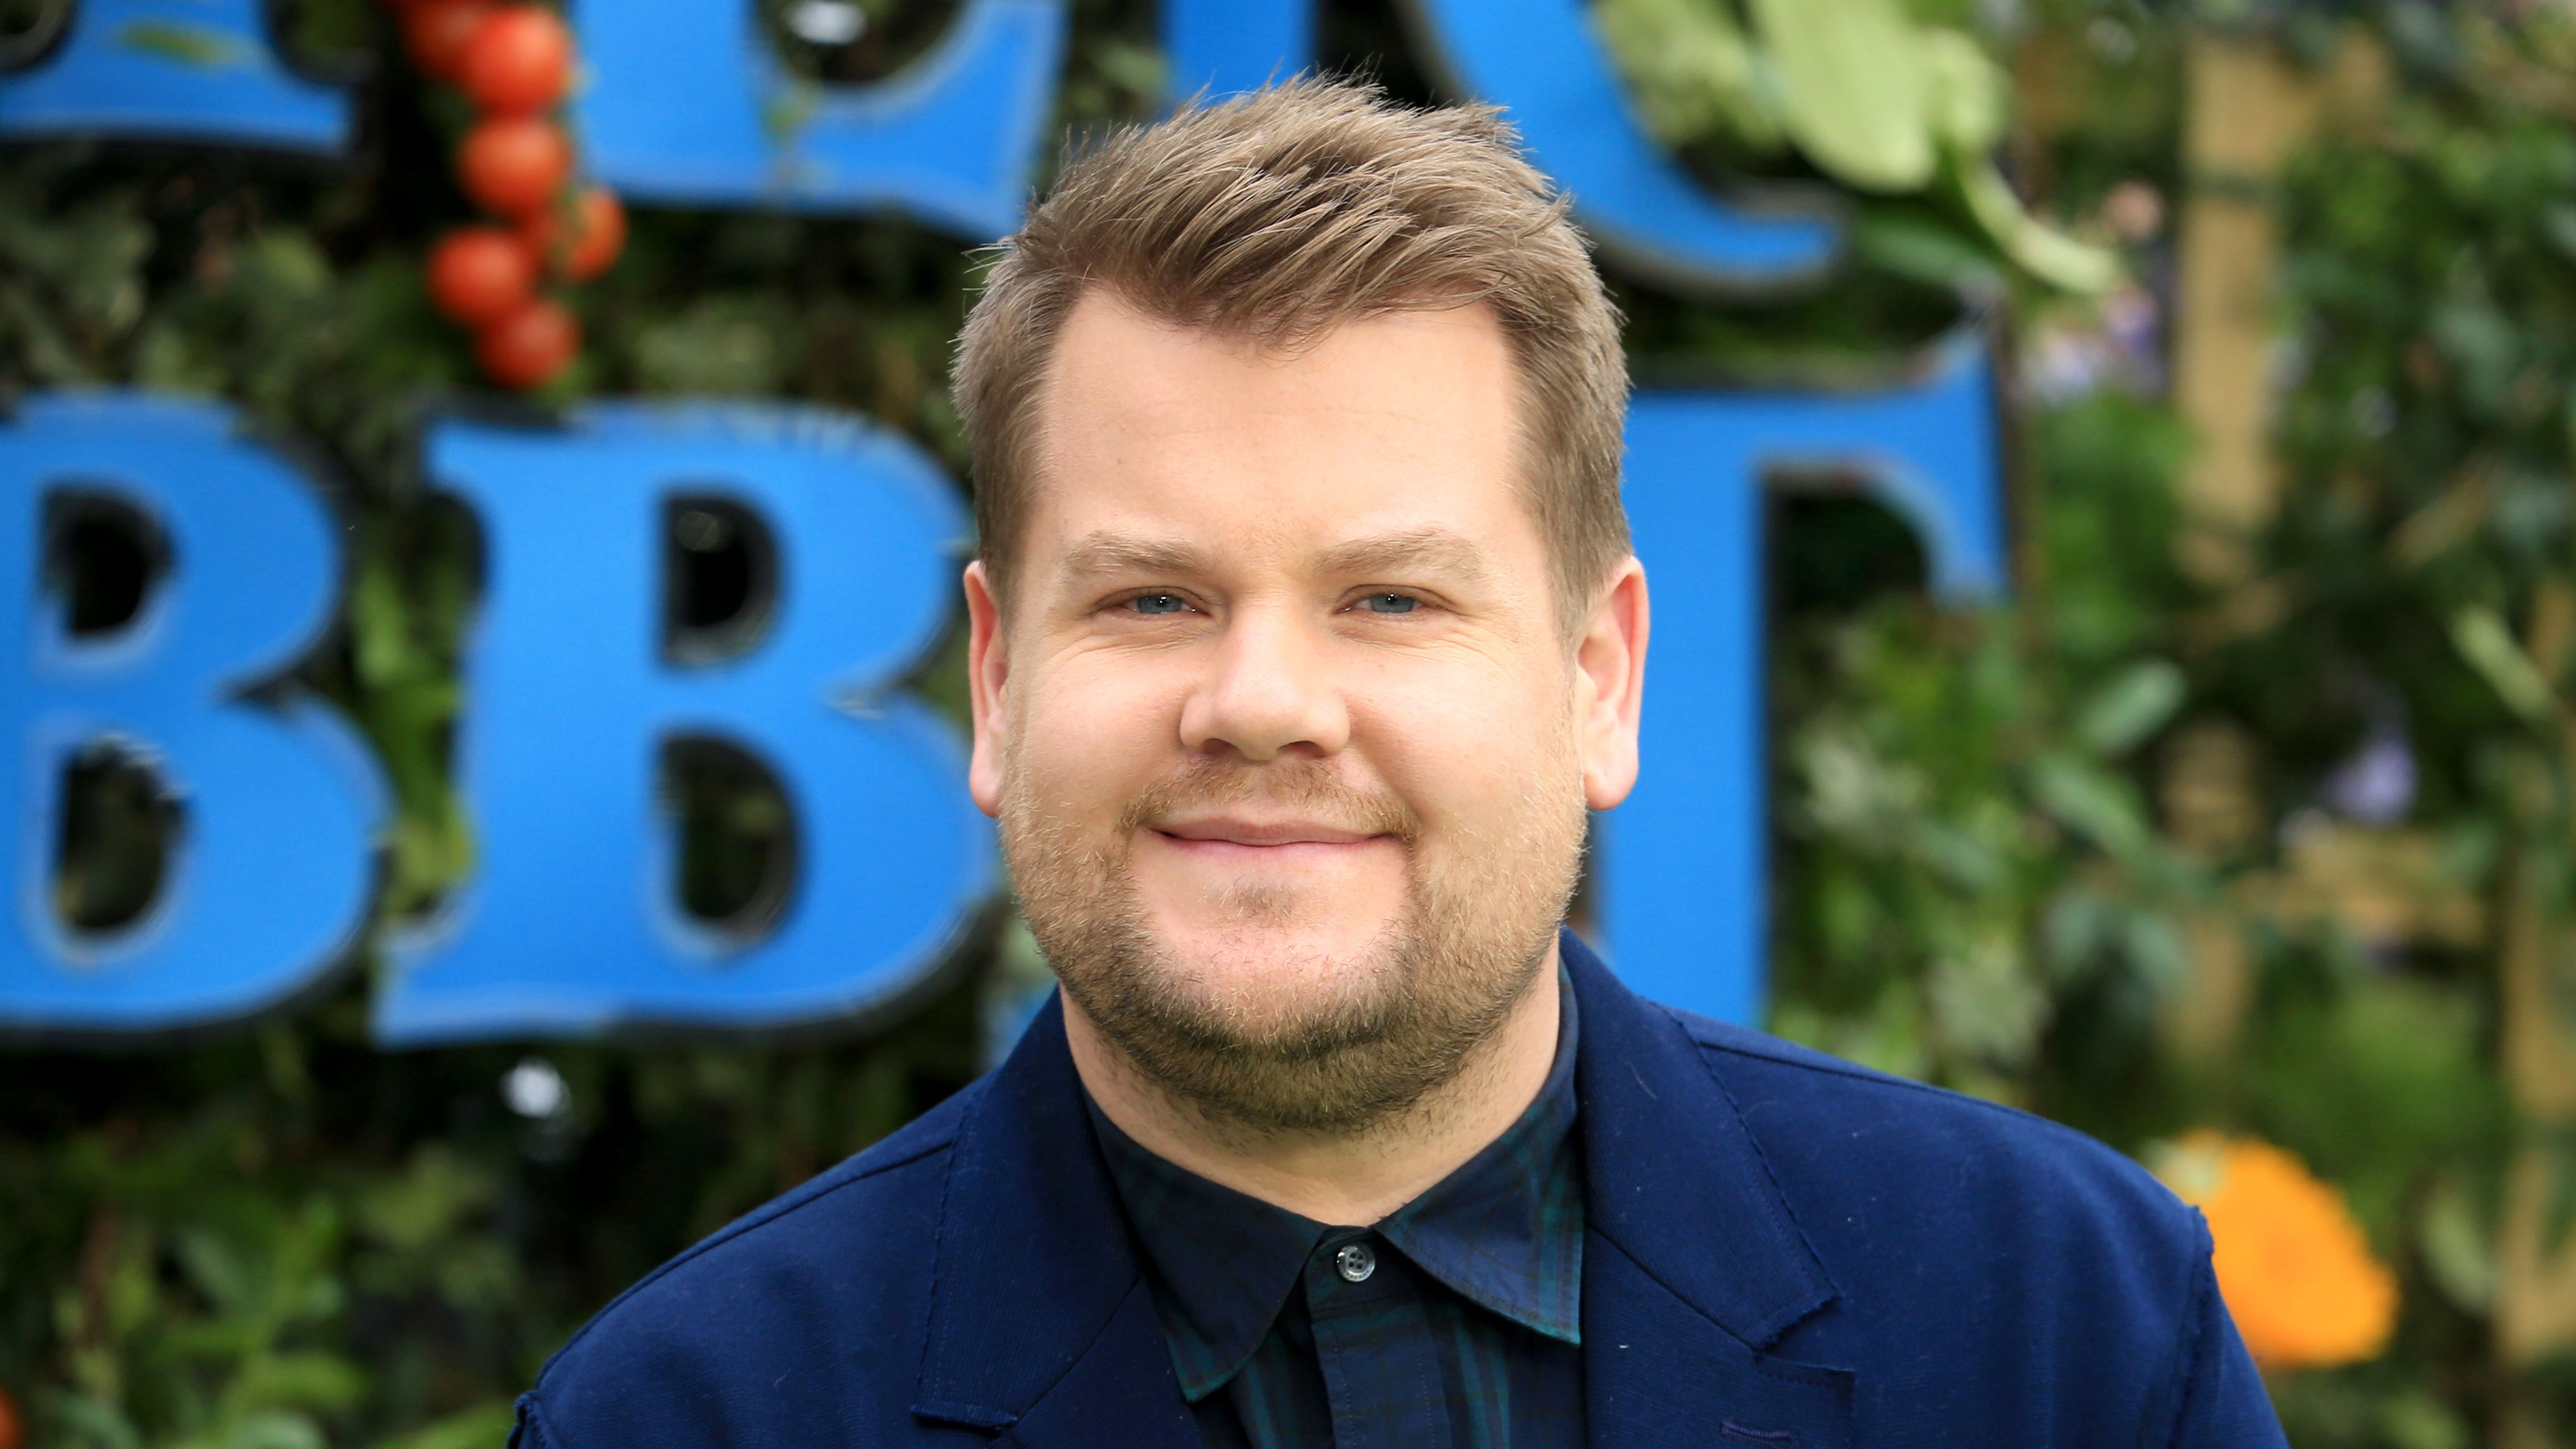 Introducing "Mammals": A Comedy Series Starring James Corden Set to Delight Audiences on Amazon Prime